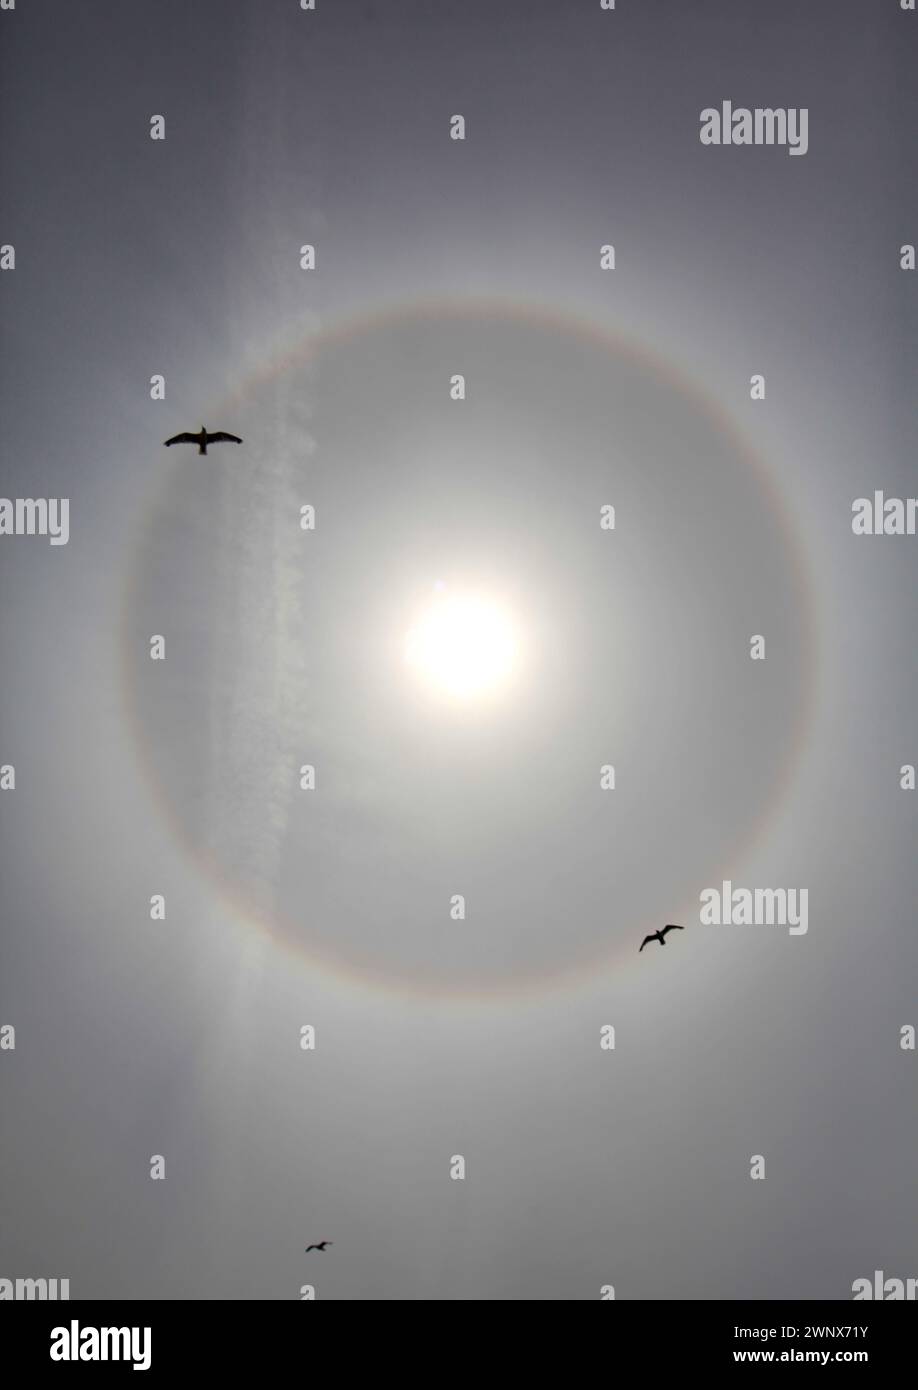 21/07/12..As temperatures finally rise the sun begins to shine through the haze above Blackpool today creating an amazing giant circular halo - the ra Stock Photo